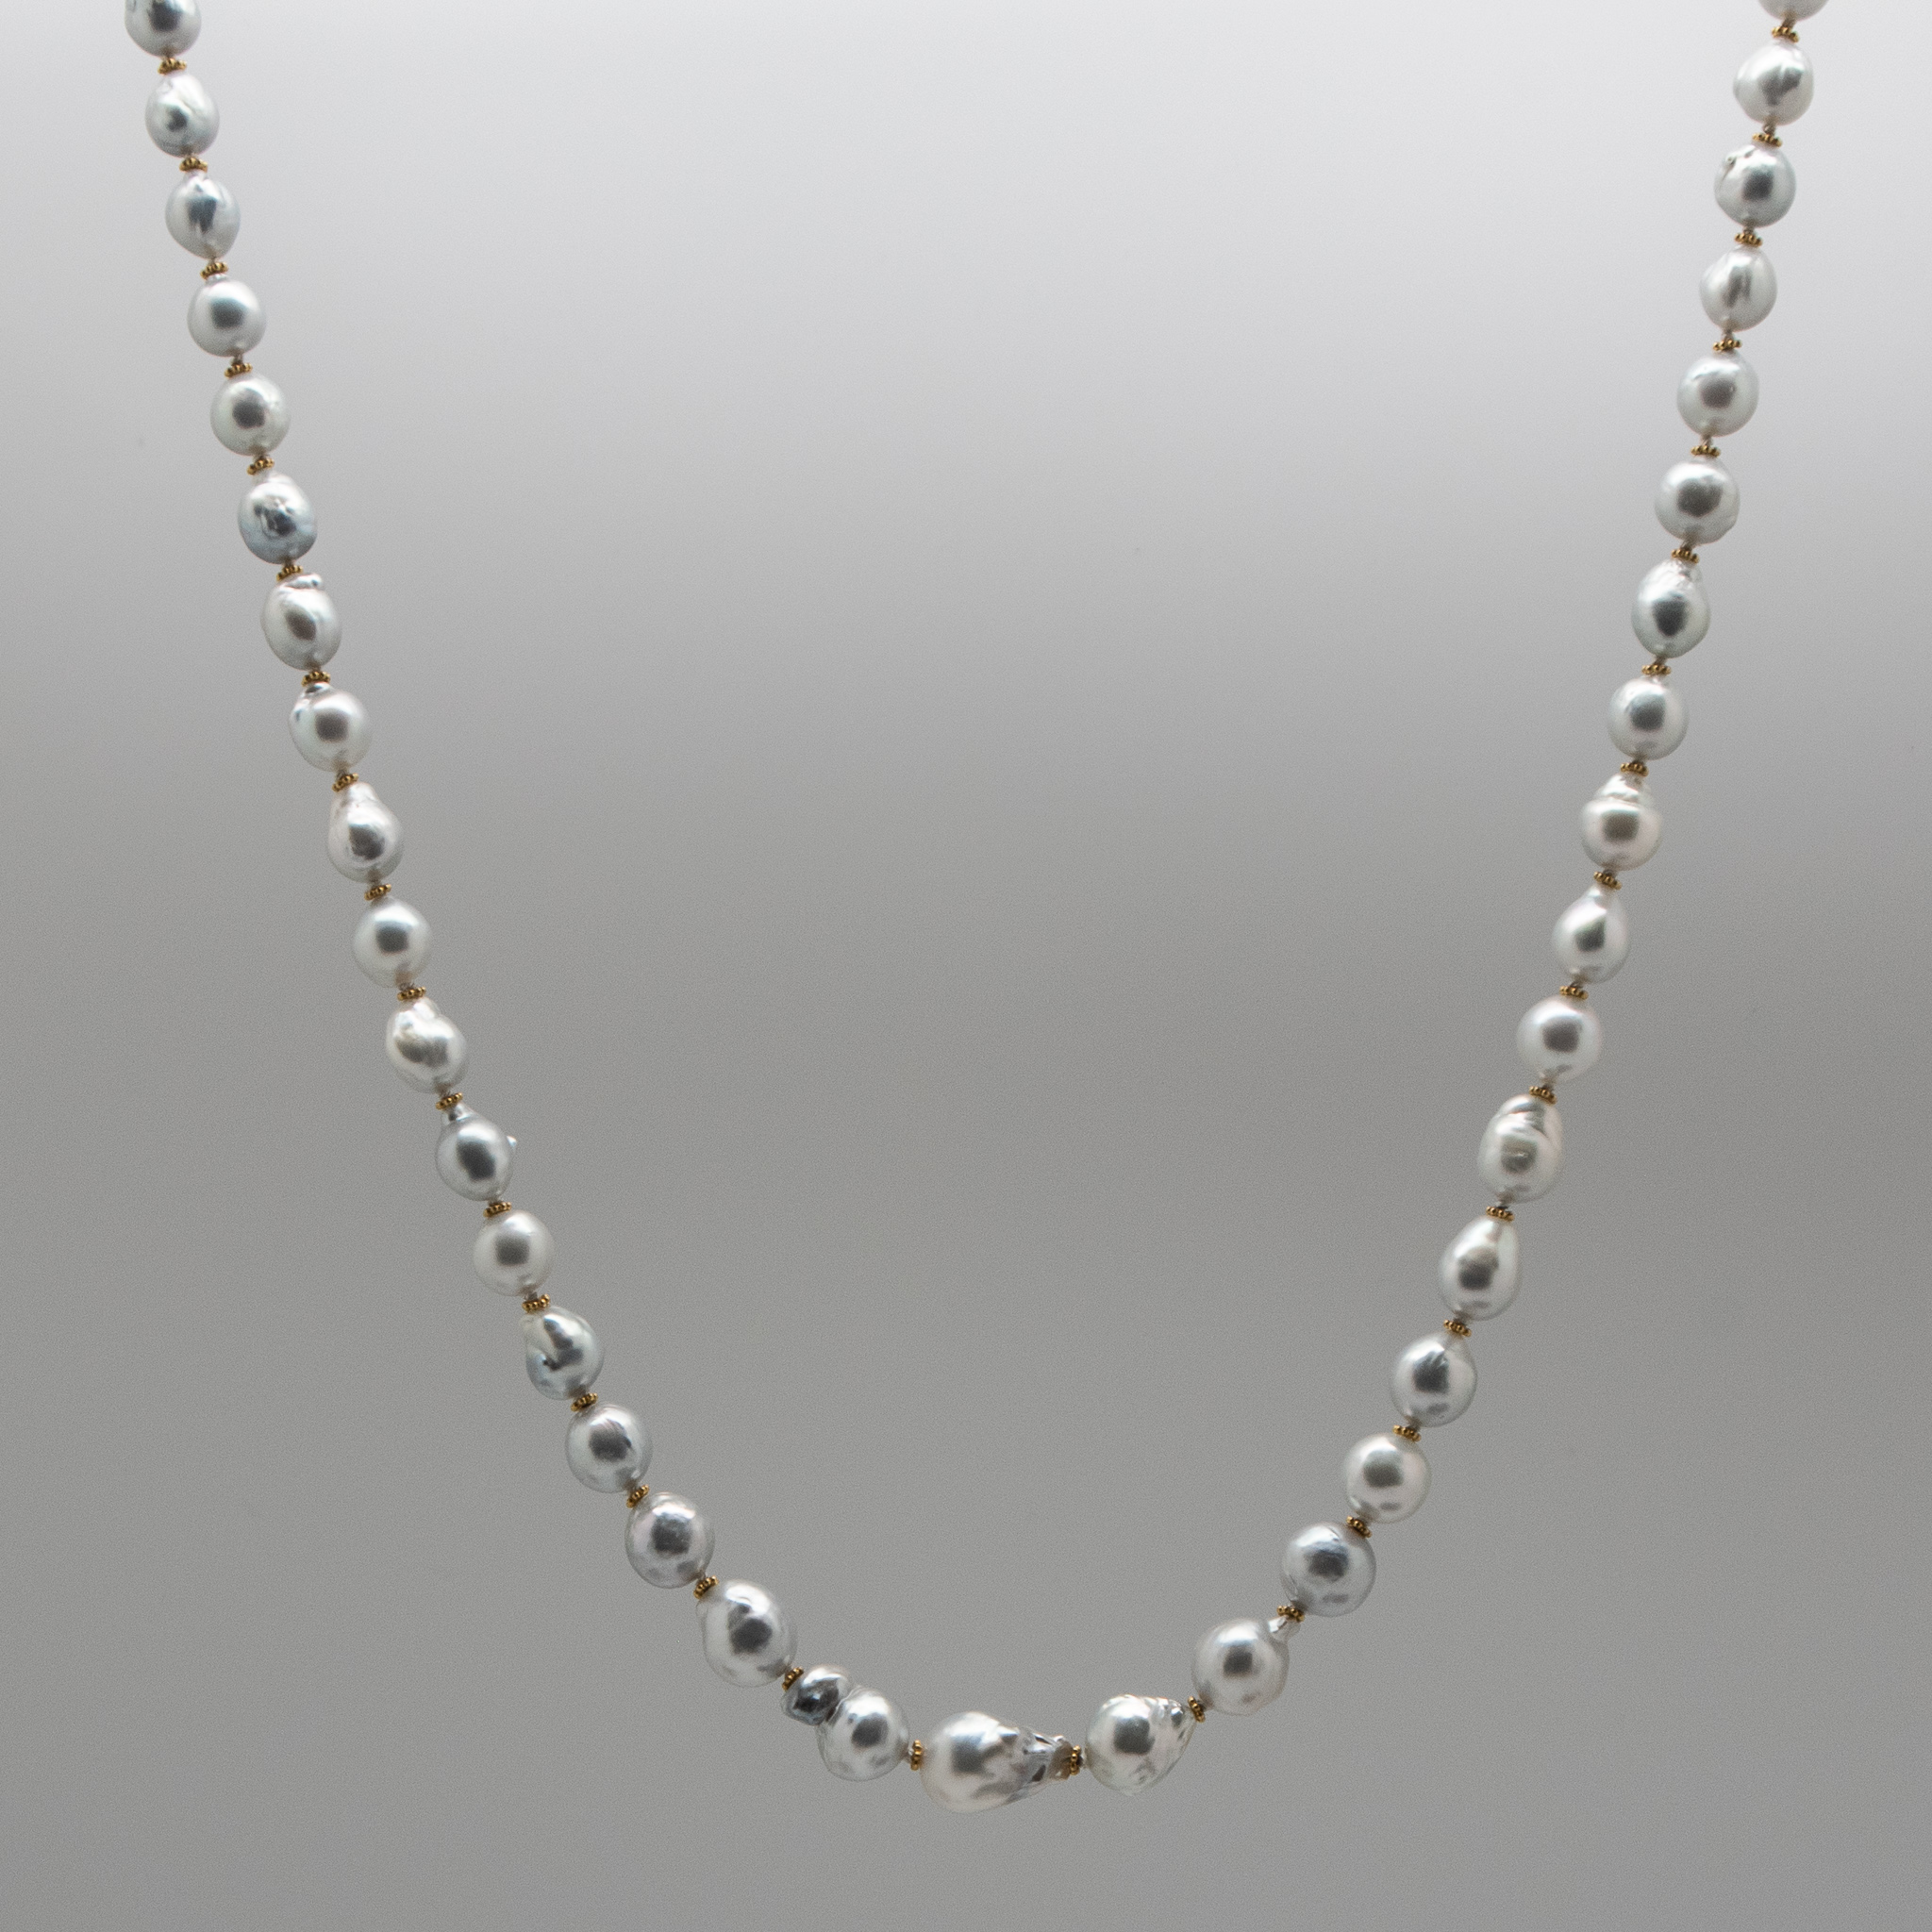 South sea pearl necklace with 22K gold accents